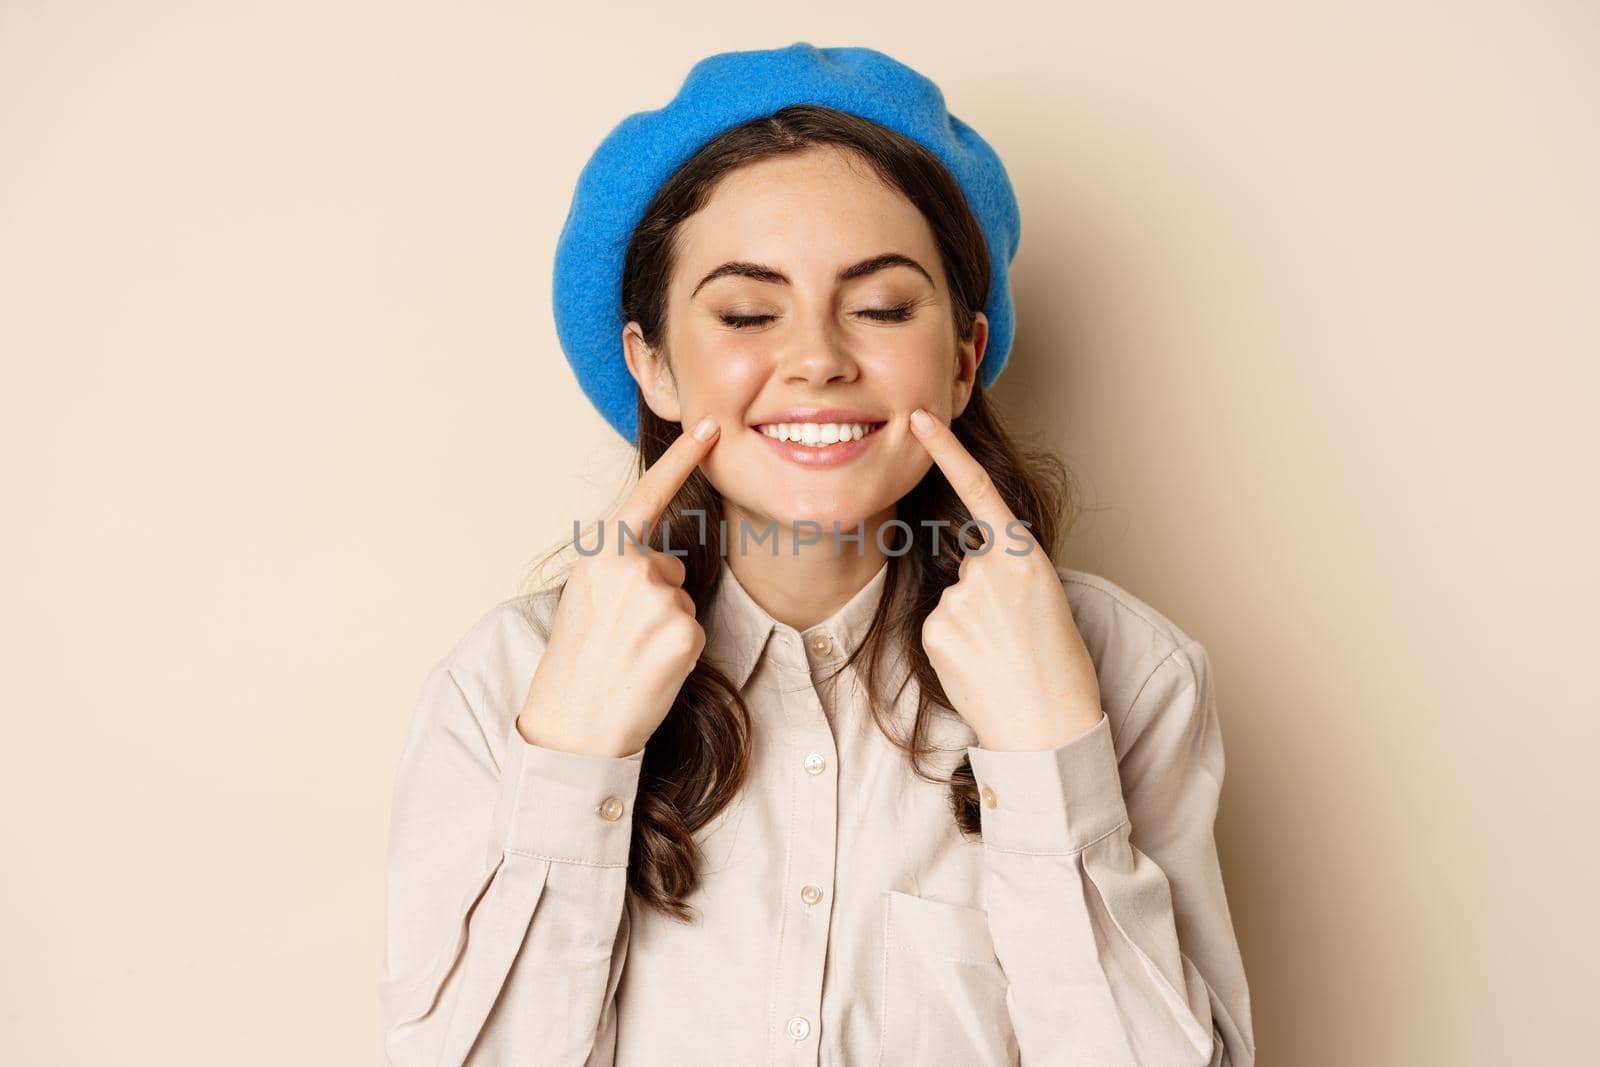 Cute happy woman smiling white teeth, pointing at her dimples, standing over beige background. People and faces concept